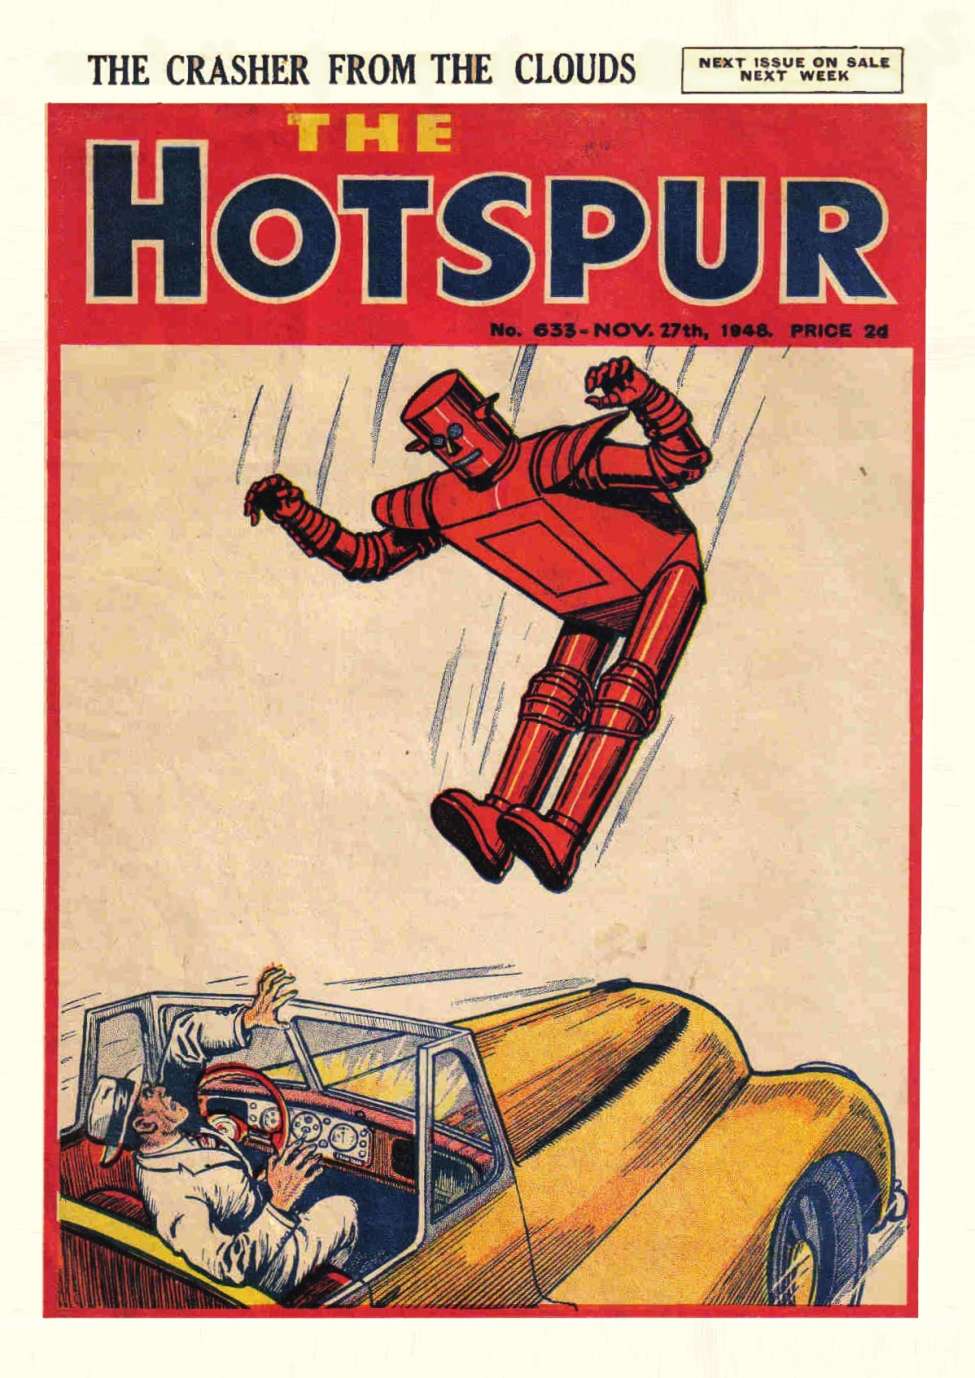 Book Cover For The Hotspur 633